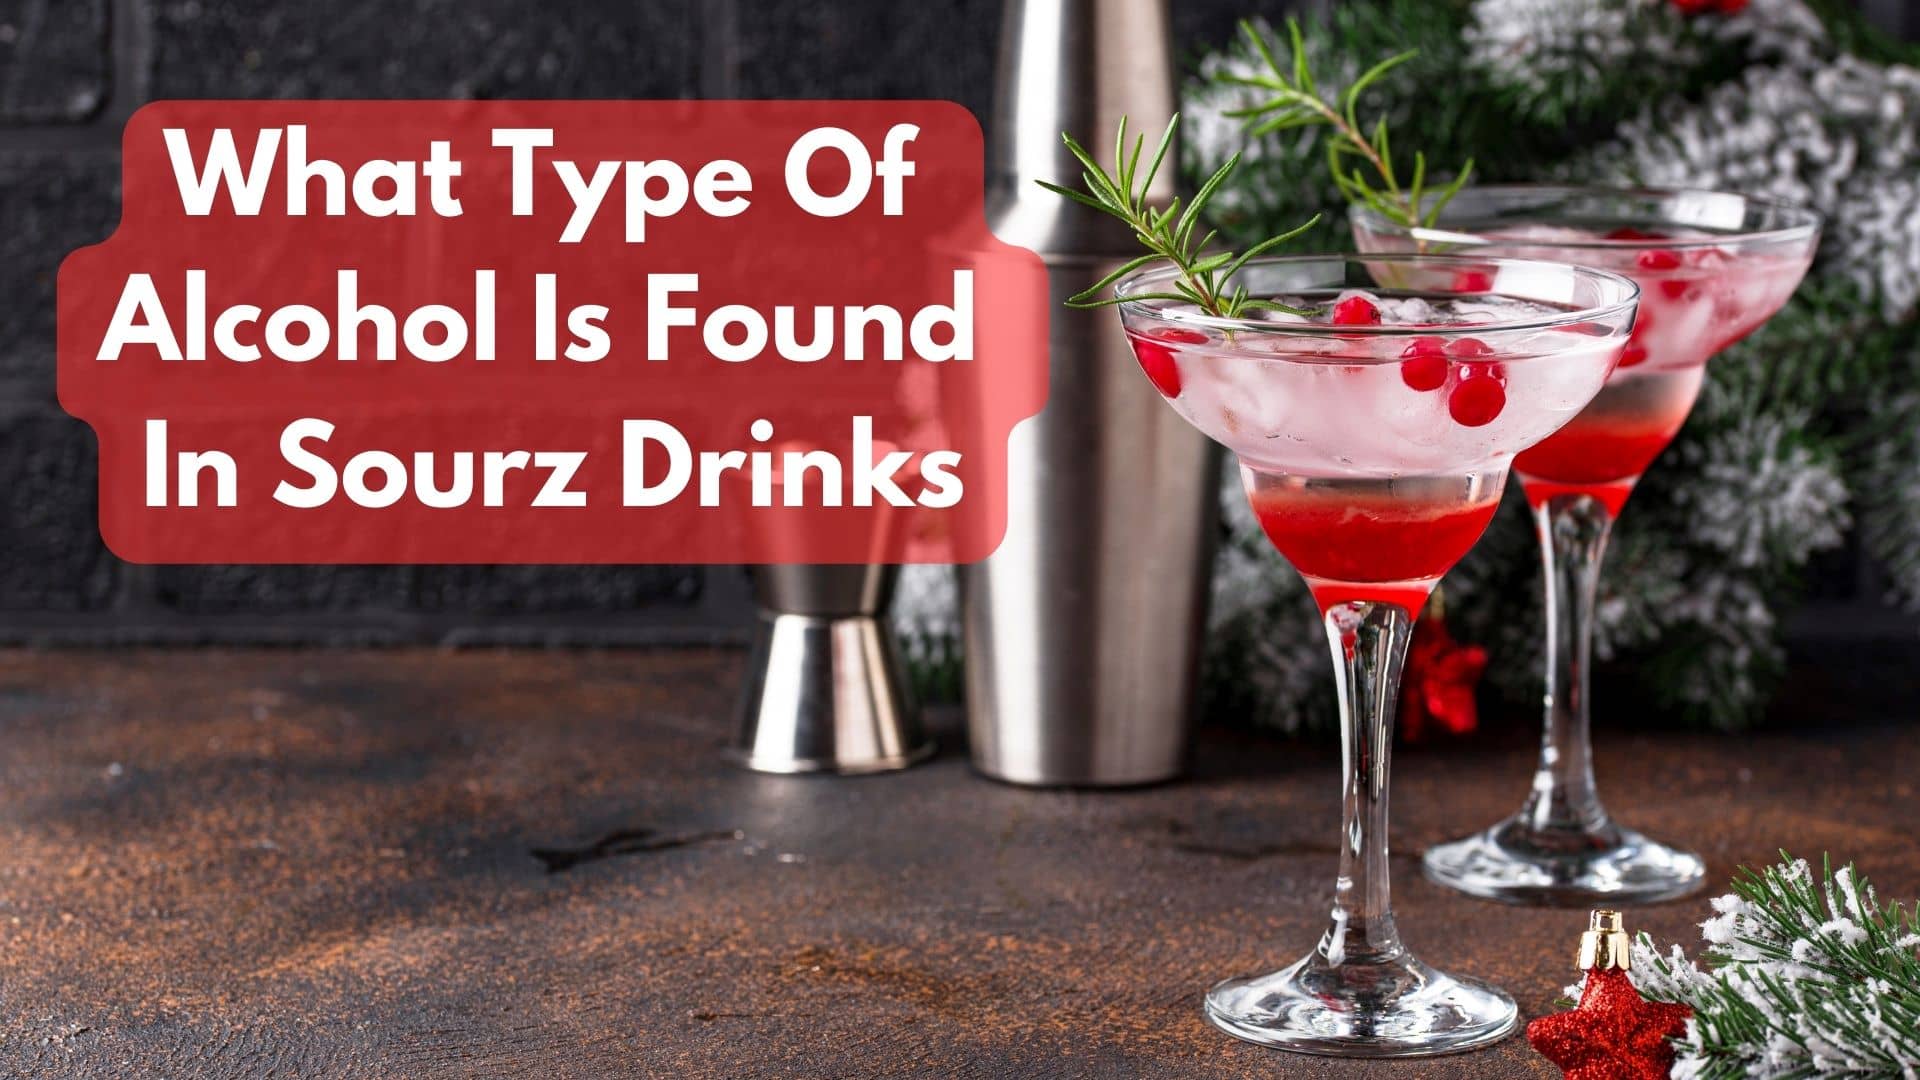 What Type Of Alcohol Is Found In Sourz Drinks?